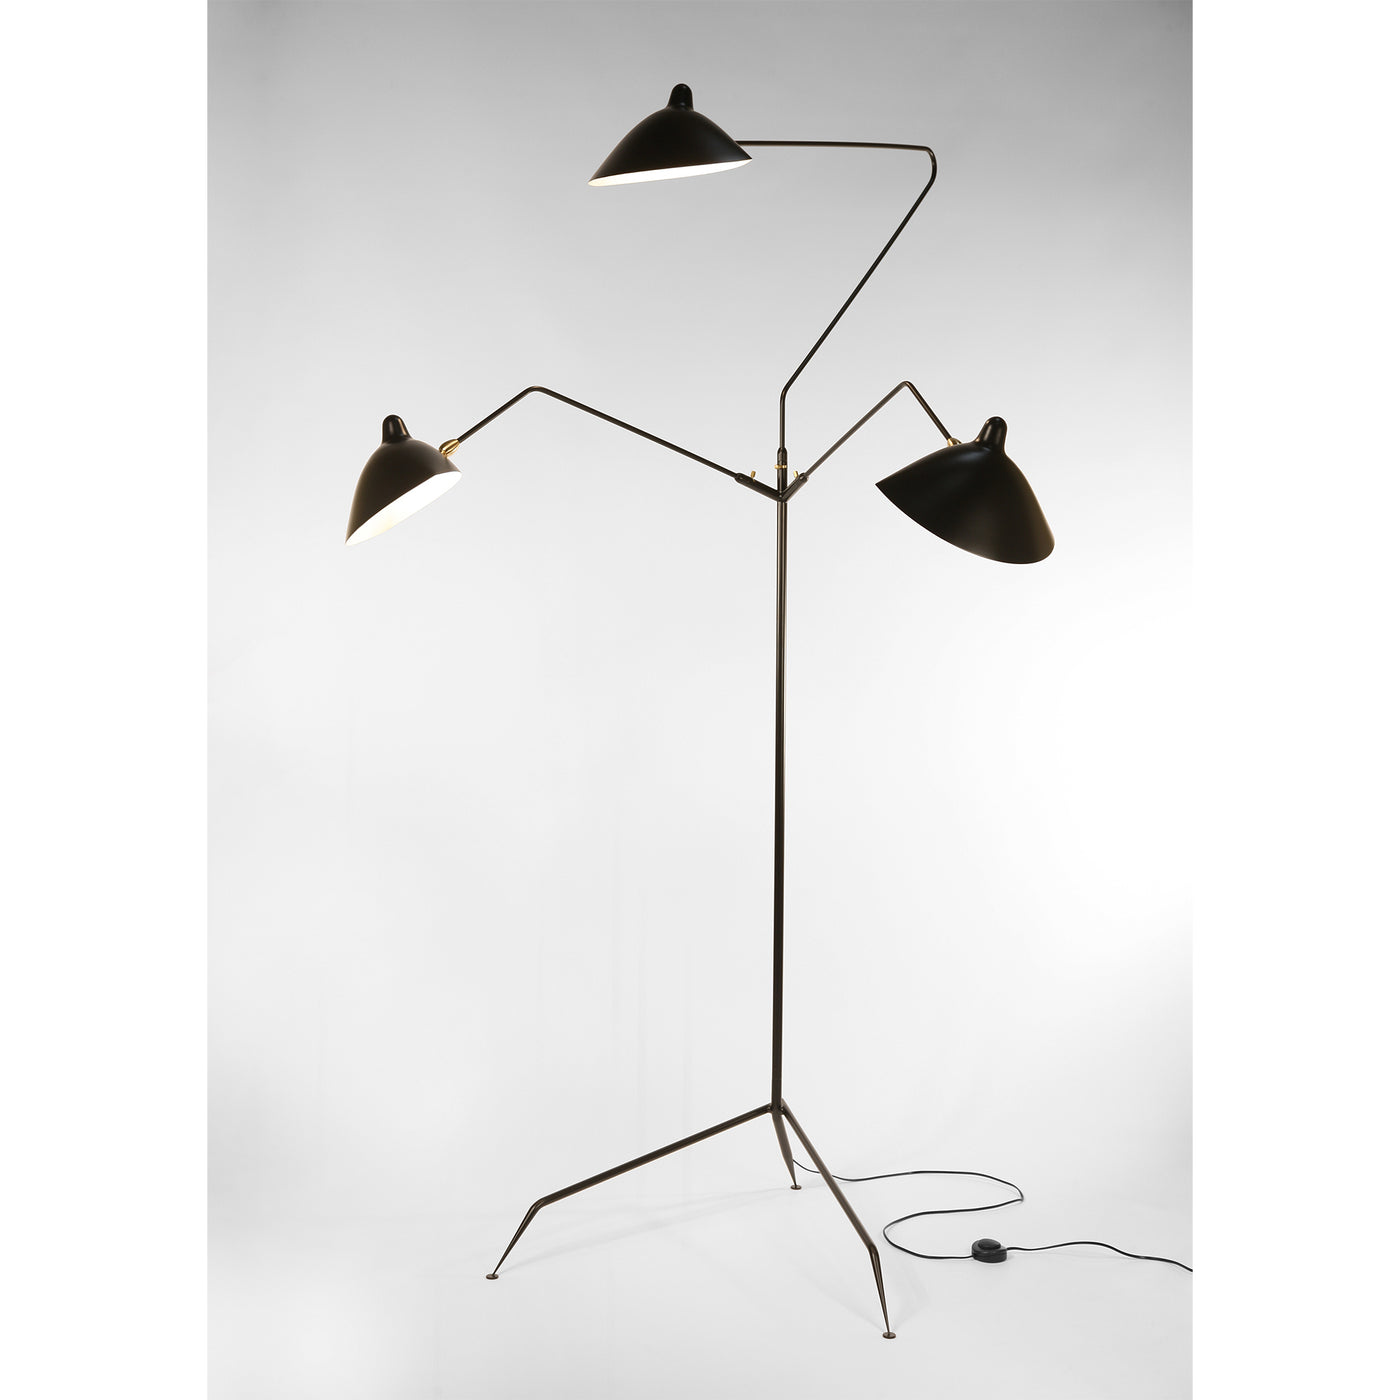 STANDING LAMP 3 arms (1952)